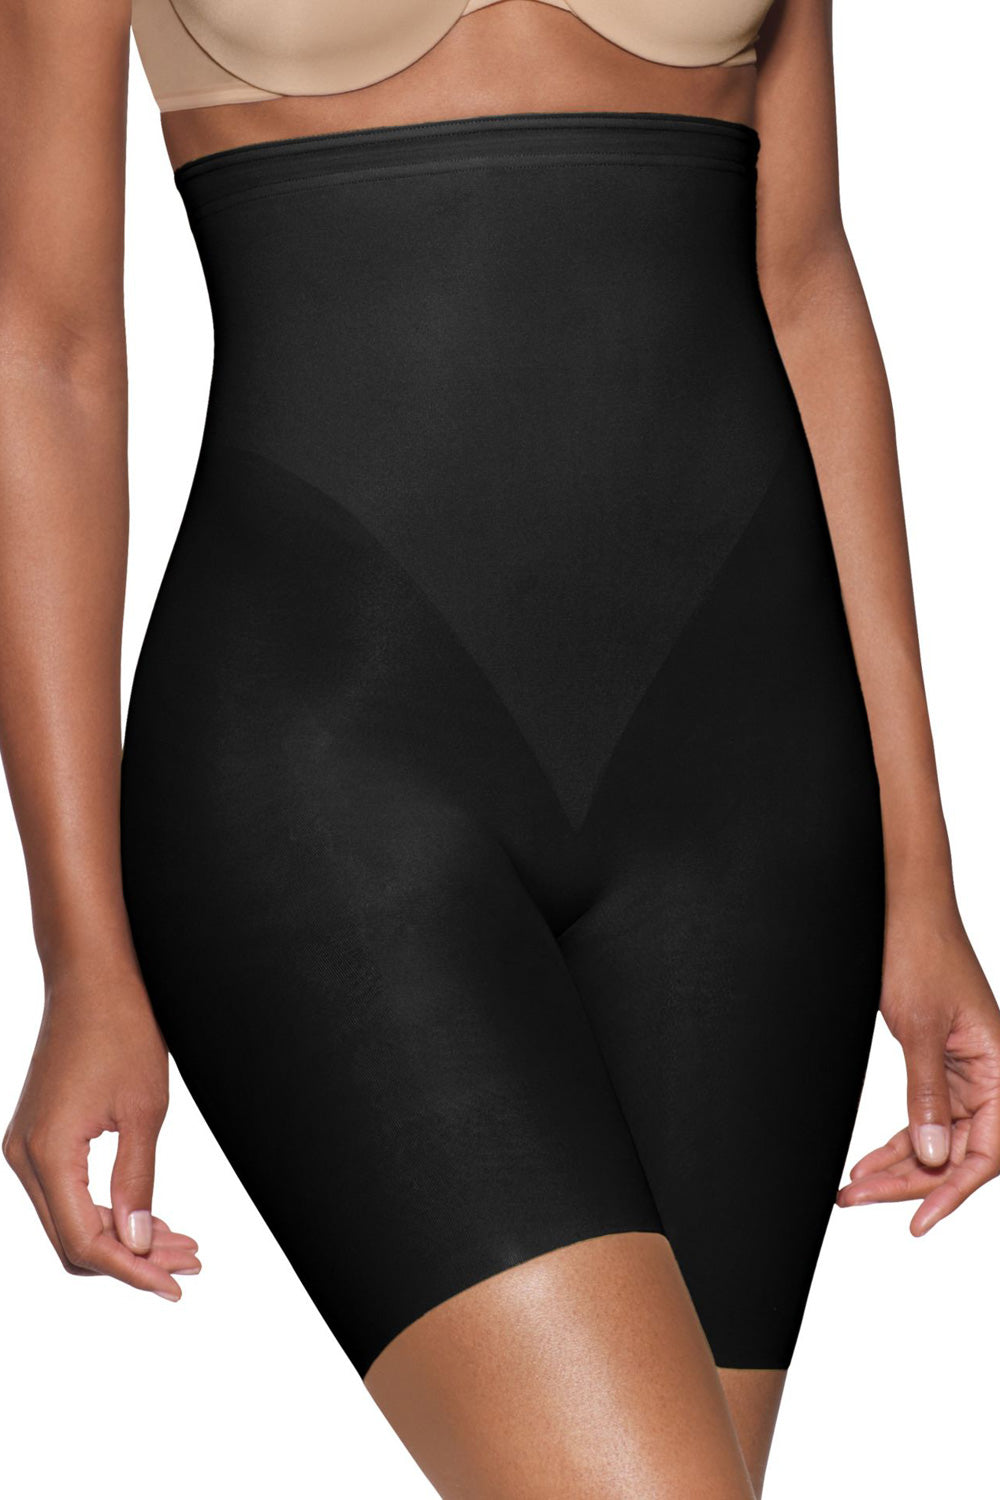 B203 - Bali Shapewear, Extra Firm Waist Smoother Invisible Look